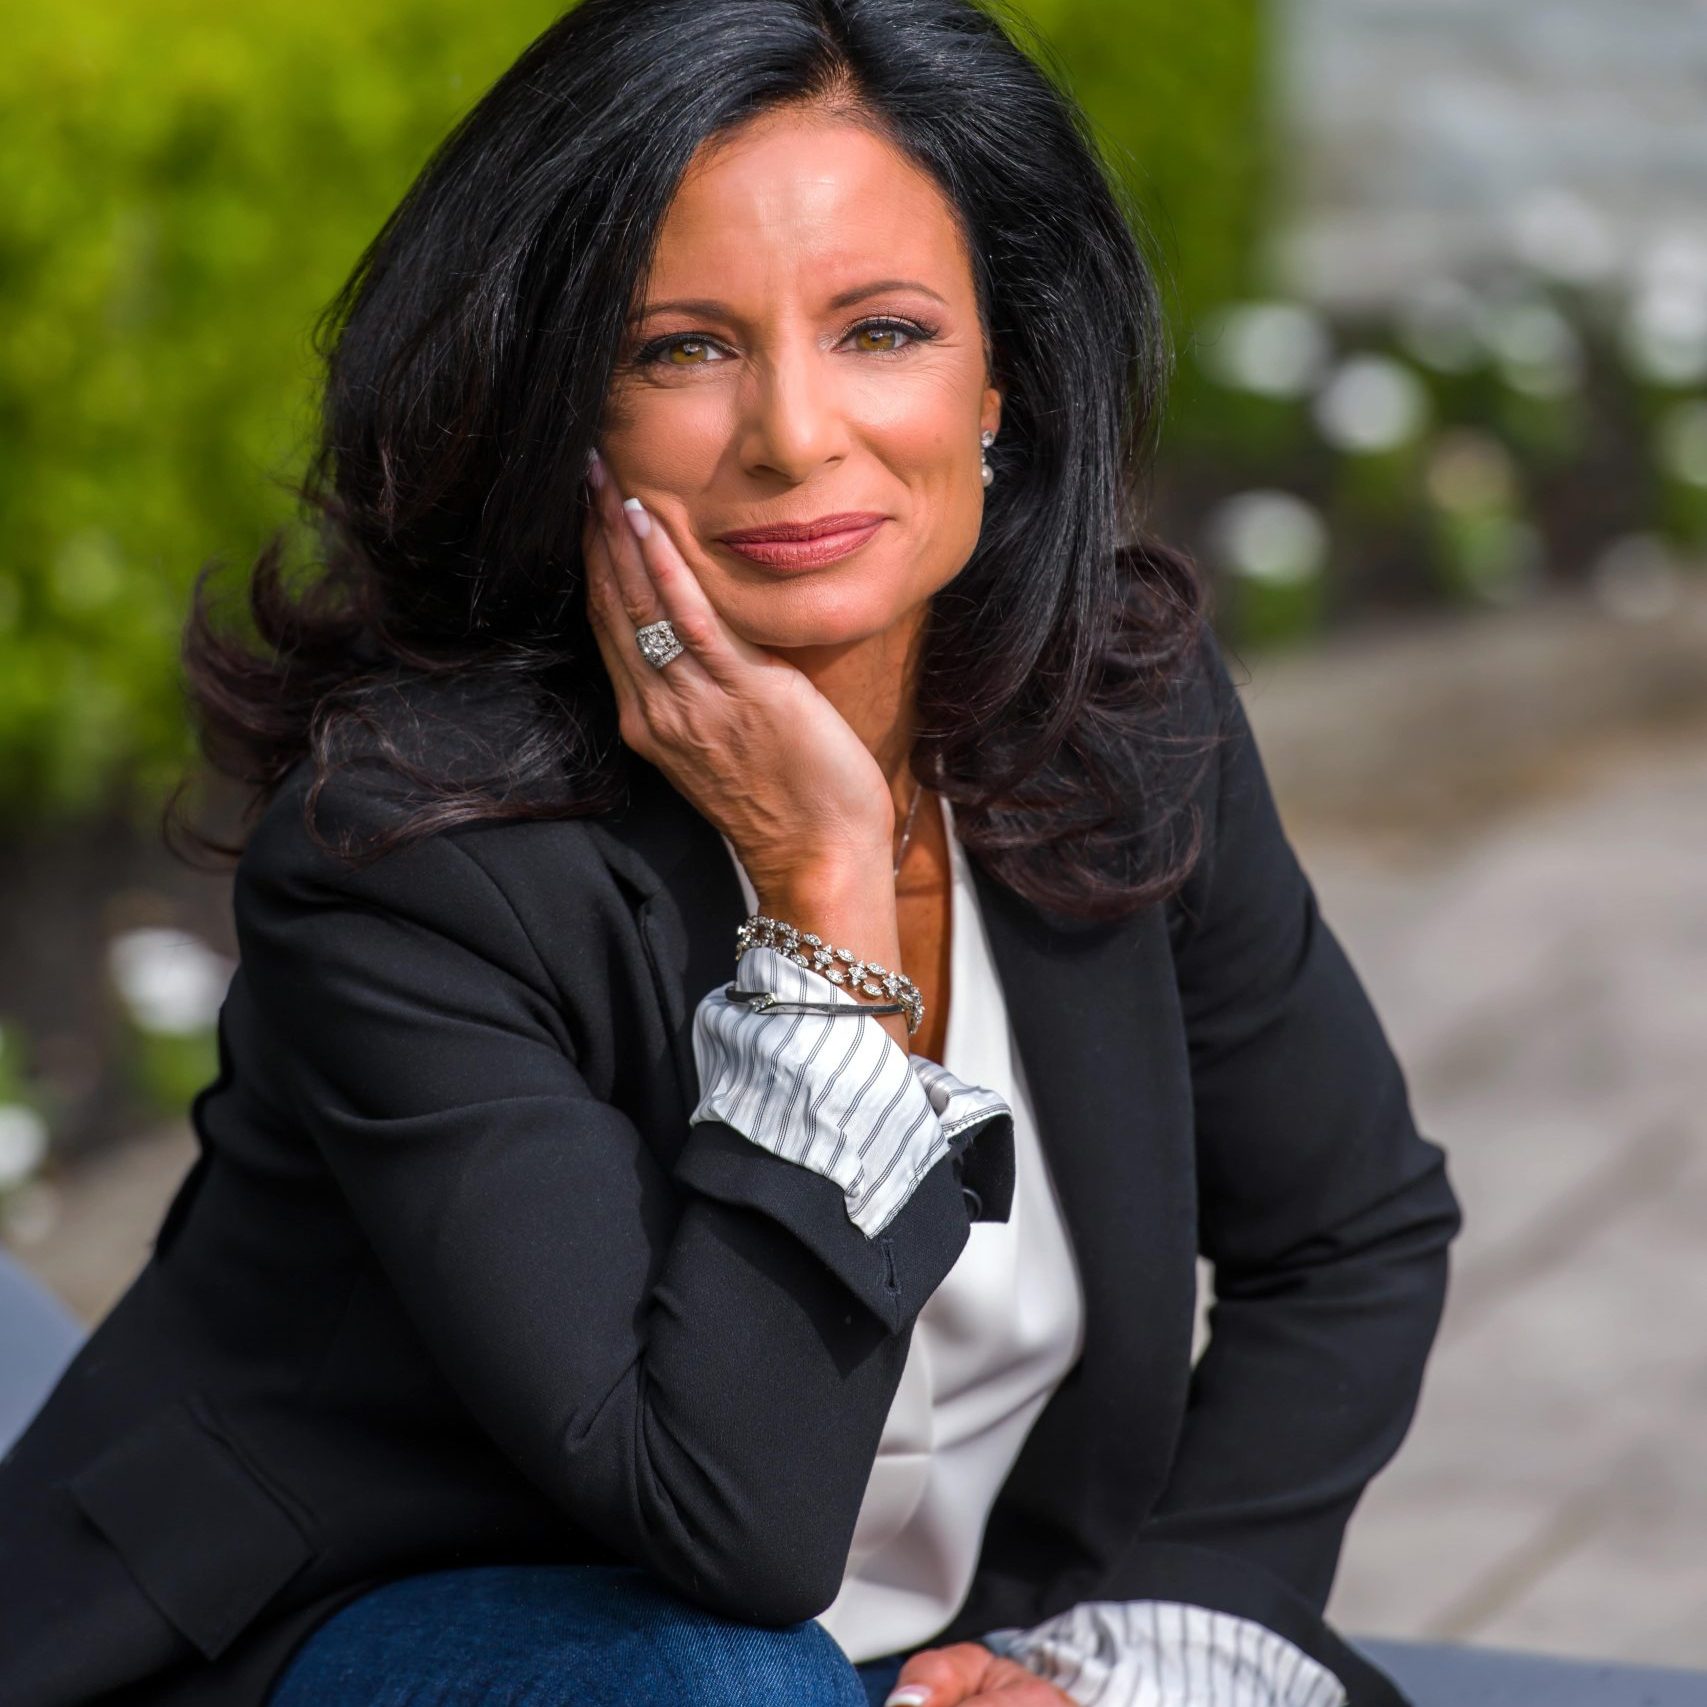 Image of a thoughtful woman with dark hair, dressed in a smart black blazer and blue jeans, sitting outdoors with green hedges in the background, resting her head on her hand.